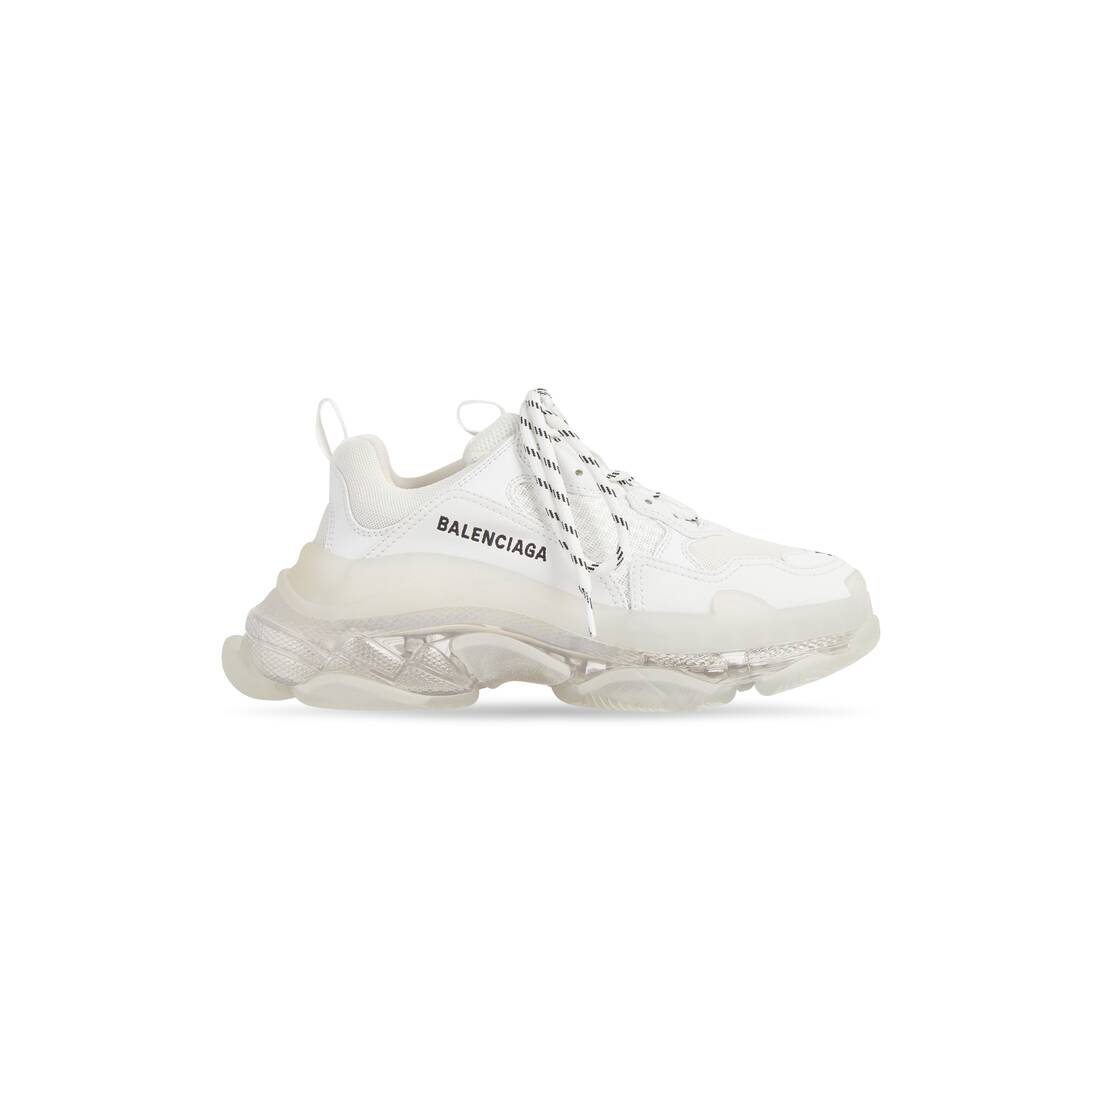 Display zoomed version of triple s sneakers clear sole 1